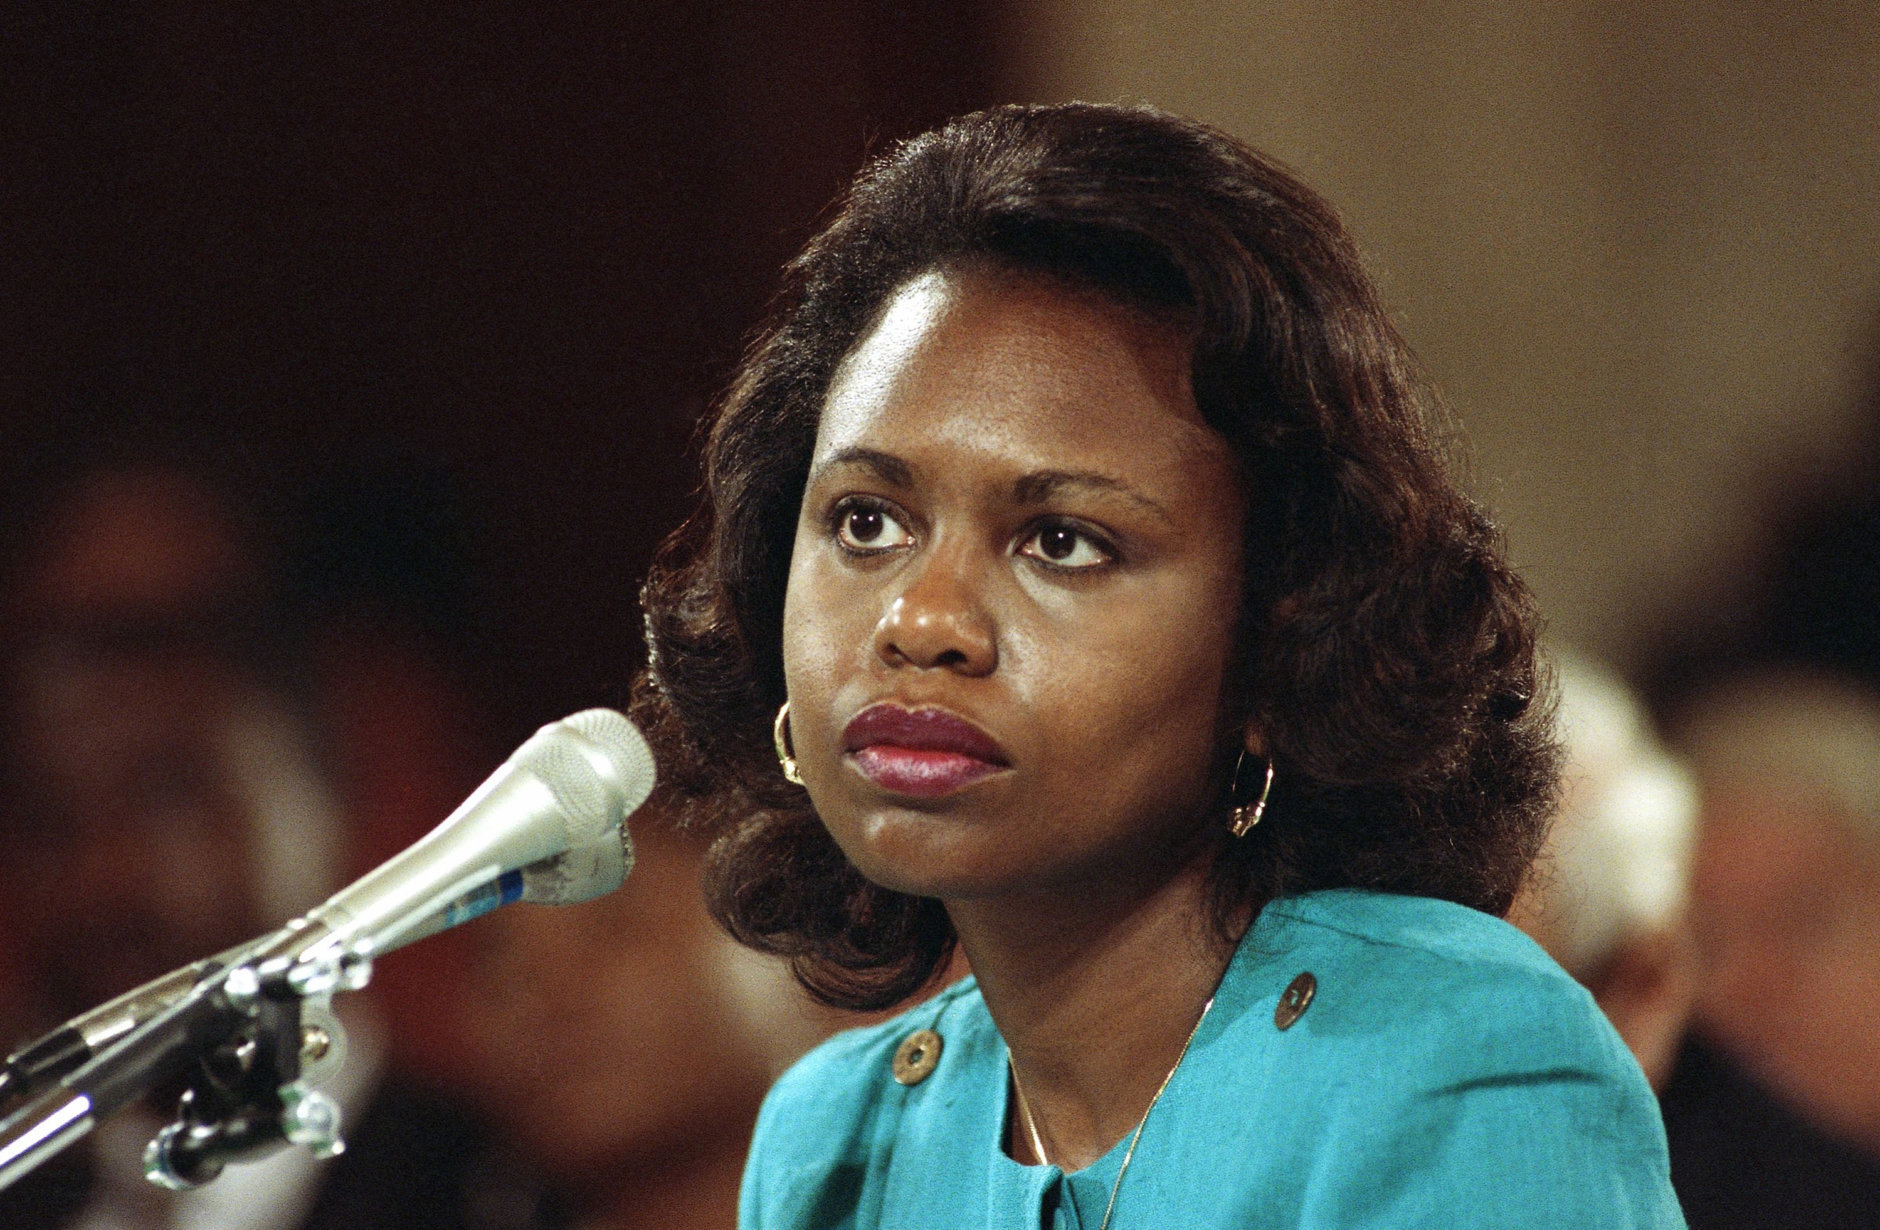 FILE - This Oct. 11, 1991 file photo shows University of Oklahoma Law Professor Anita Hill testifying before the Senate Judiciary Committee on Capitol Hill in Washington. HBO says that Scandal star Kerry Washington will play Hill in a film about the 1991 Supreme Court confirmation hearings for Clarence Thomas. (AP Photo, File)